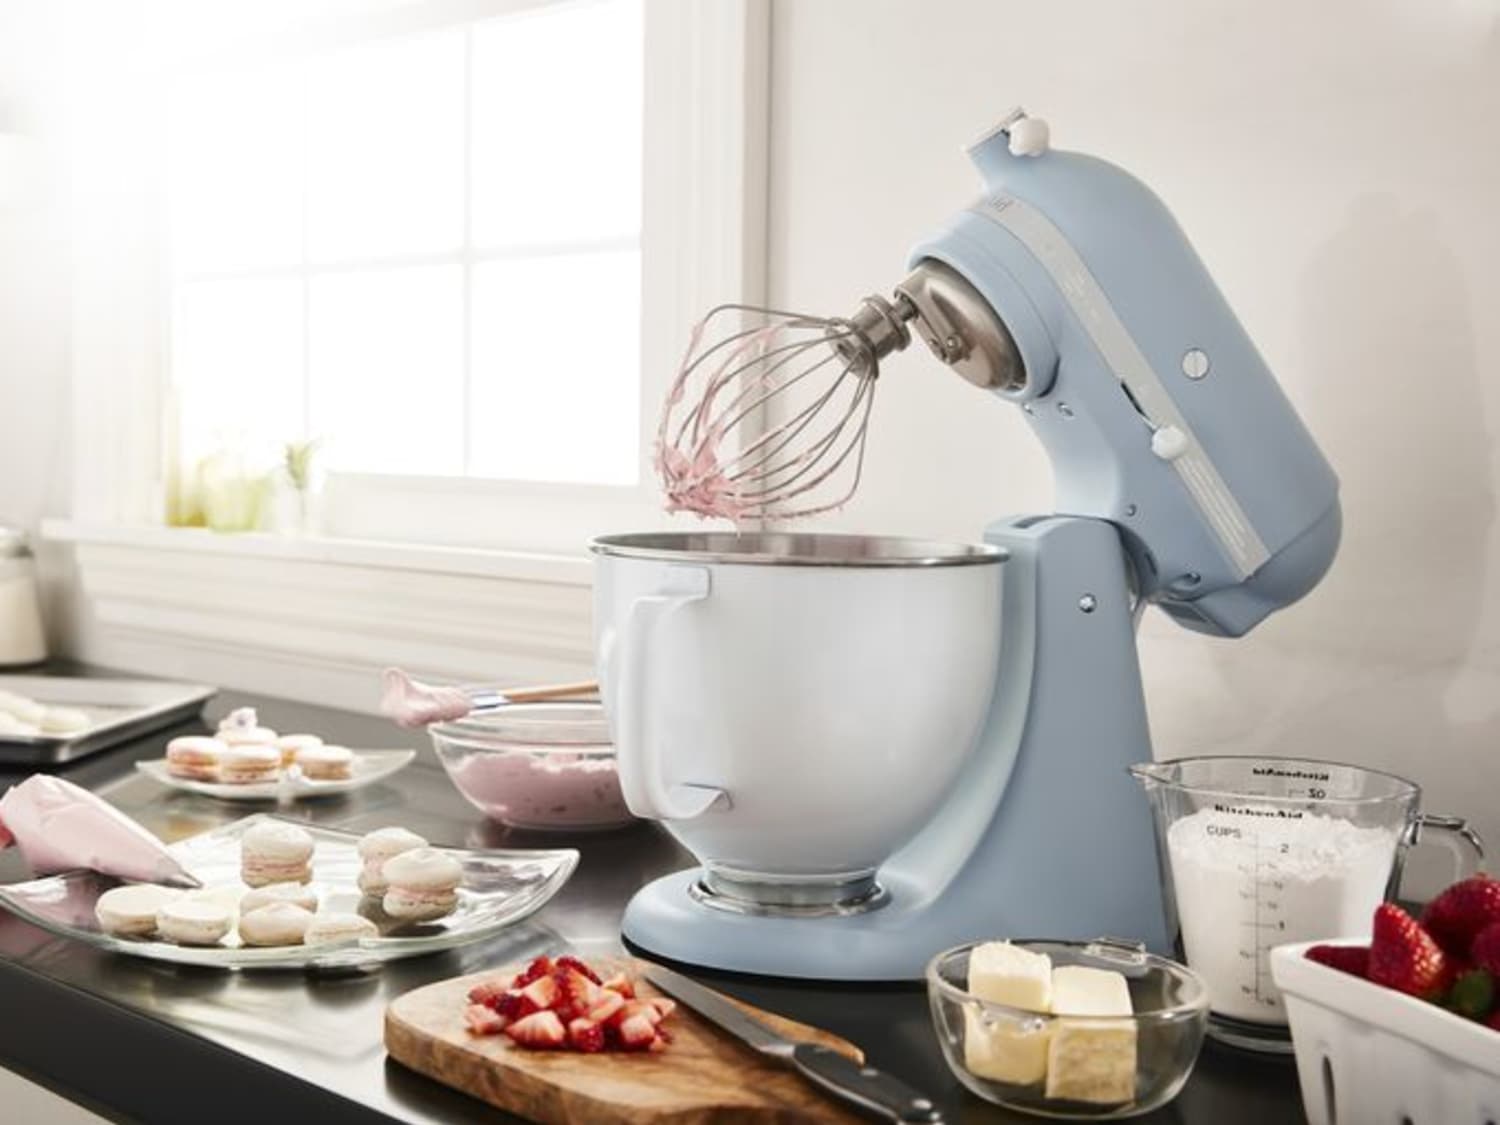 Kitchenaid Released A Retro Inspired Color For Their 100th Anniversary Apartment Therapy